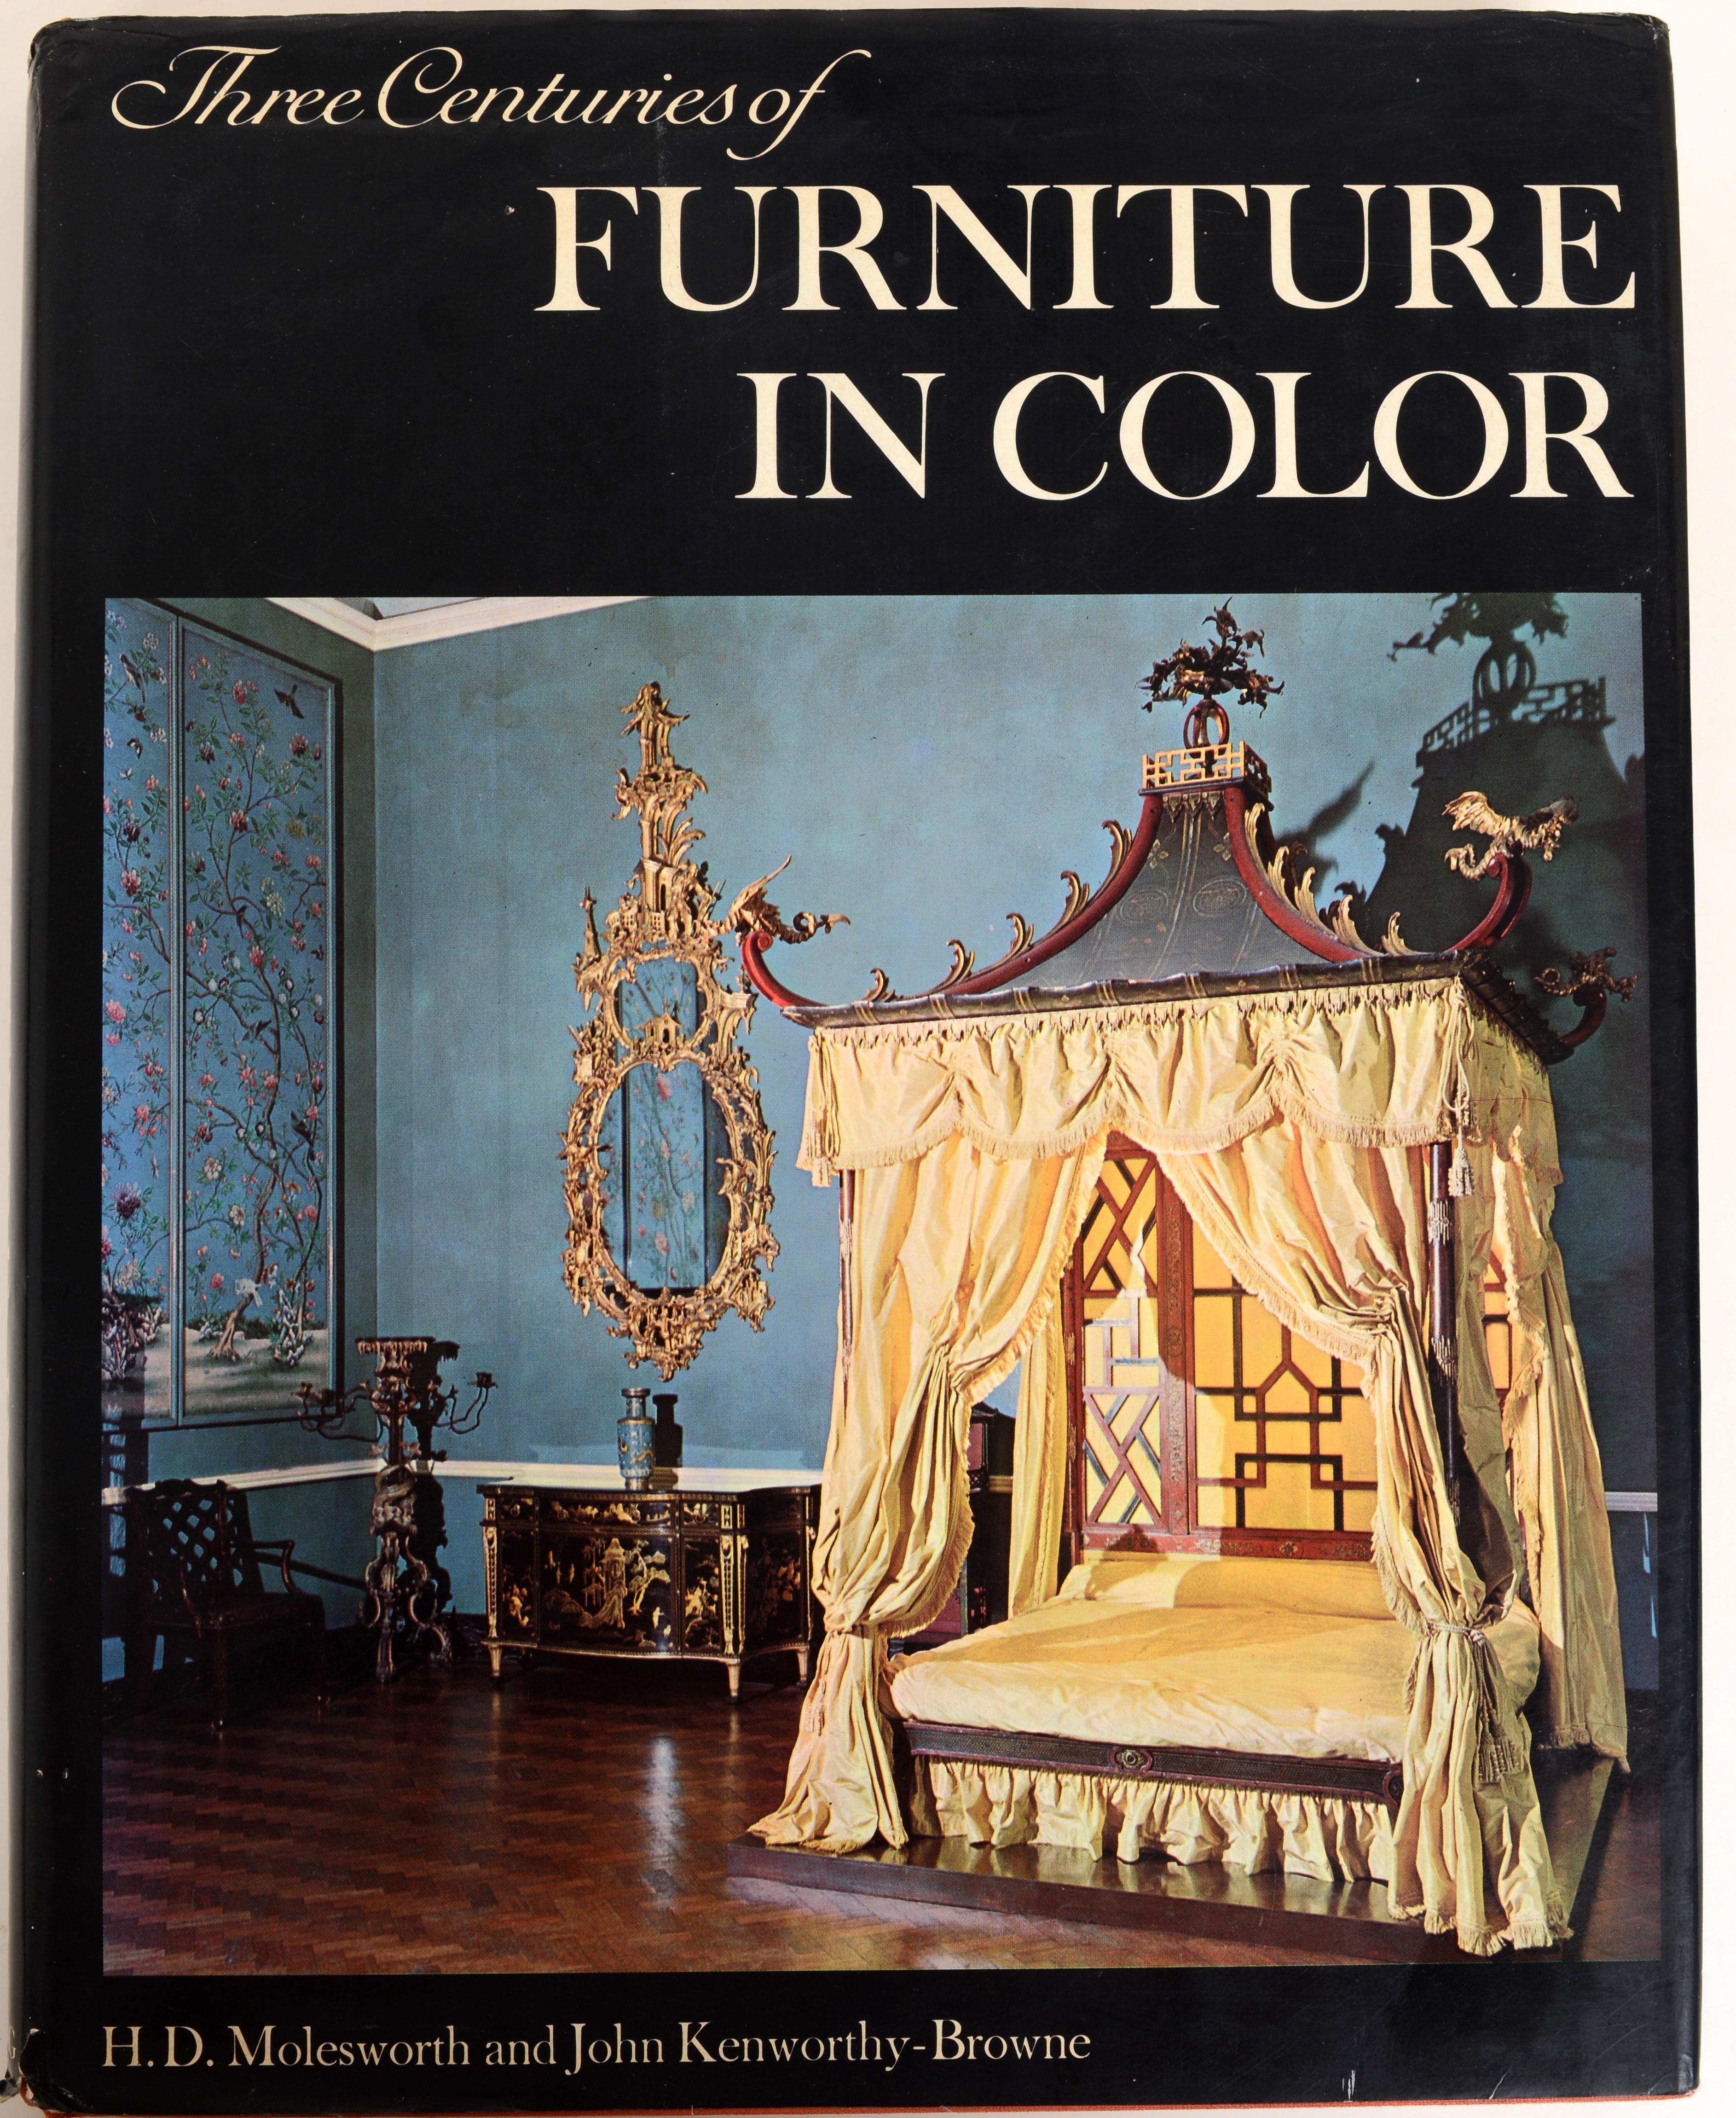 Three Centuries of Furniture in Color by J. A. Kenworthy-Browne, 1st Ed